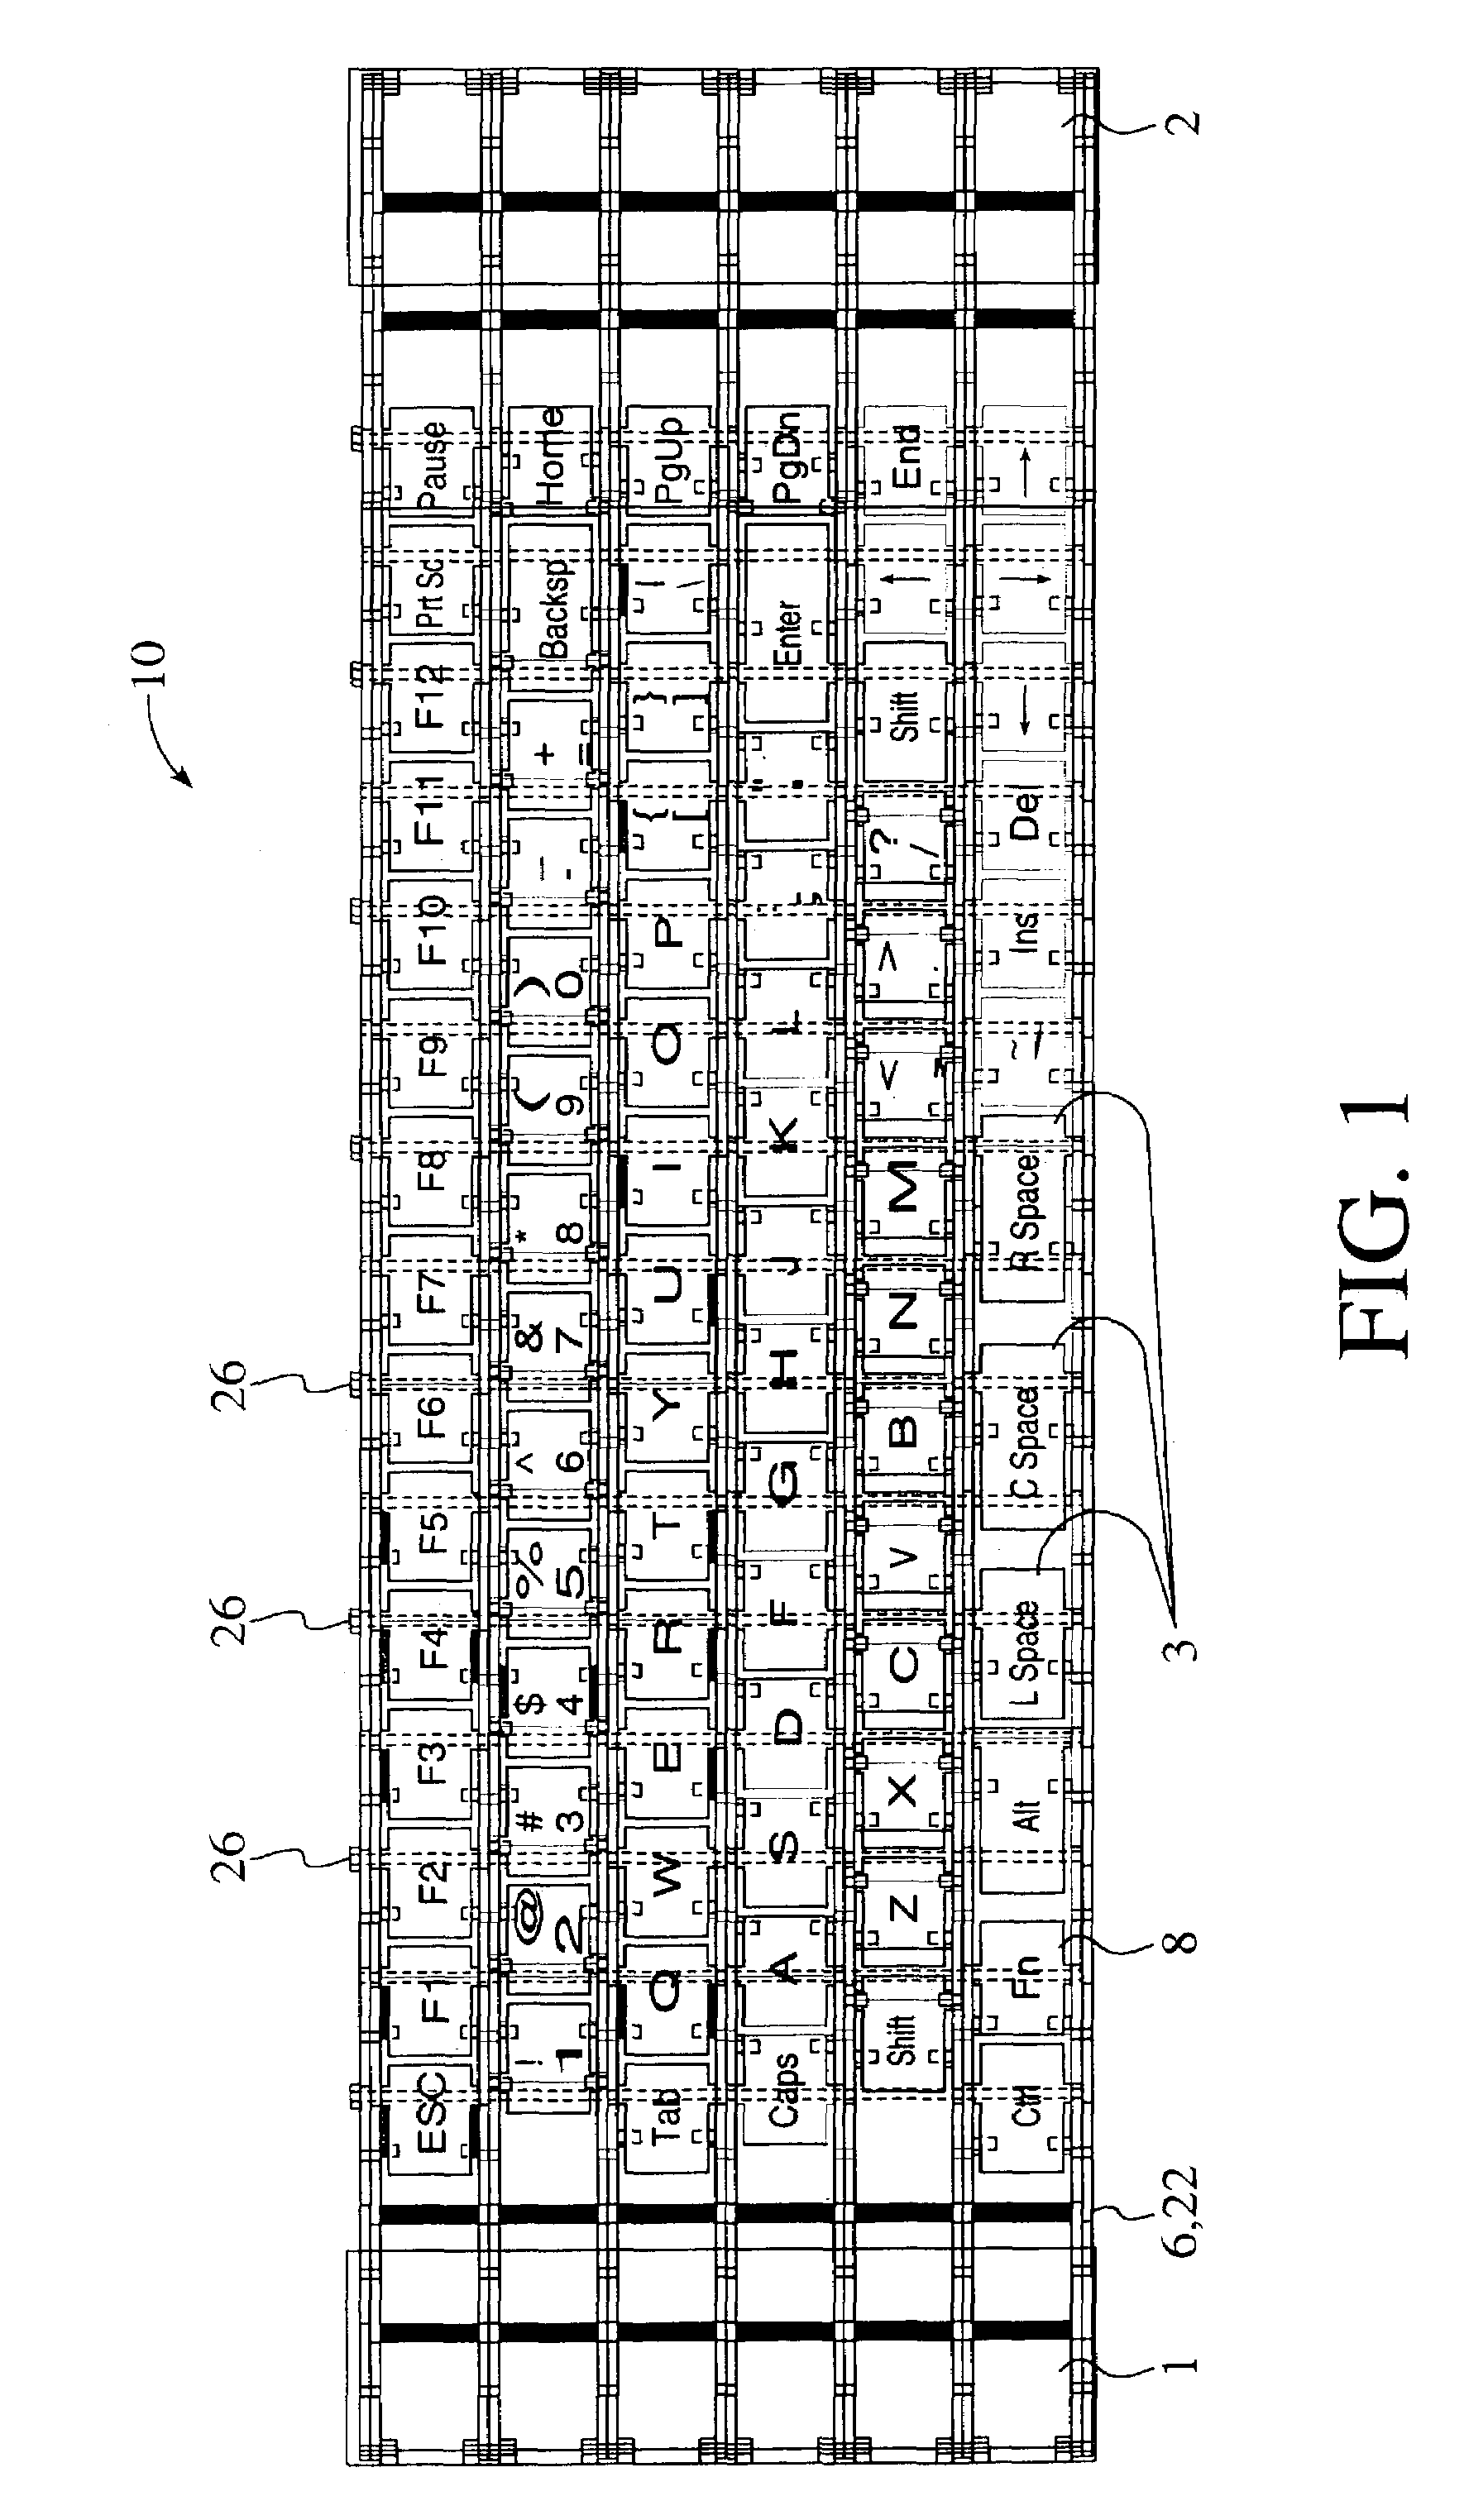 System and method for detecting key actuation in a keyboard